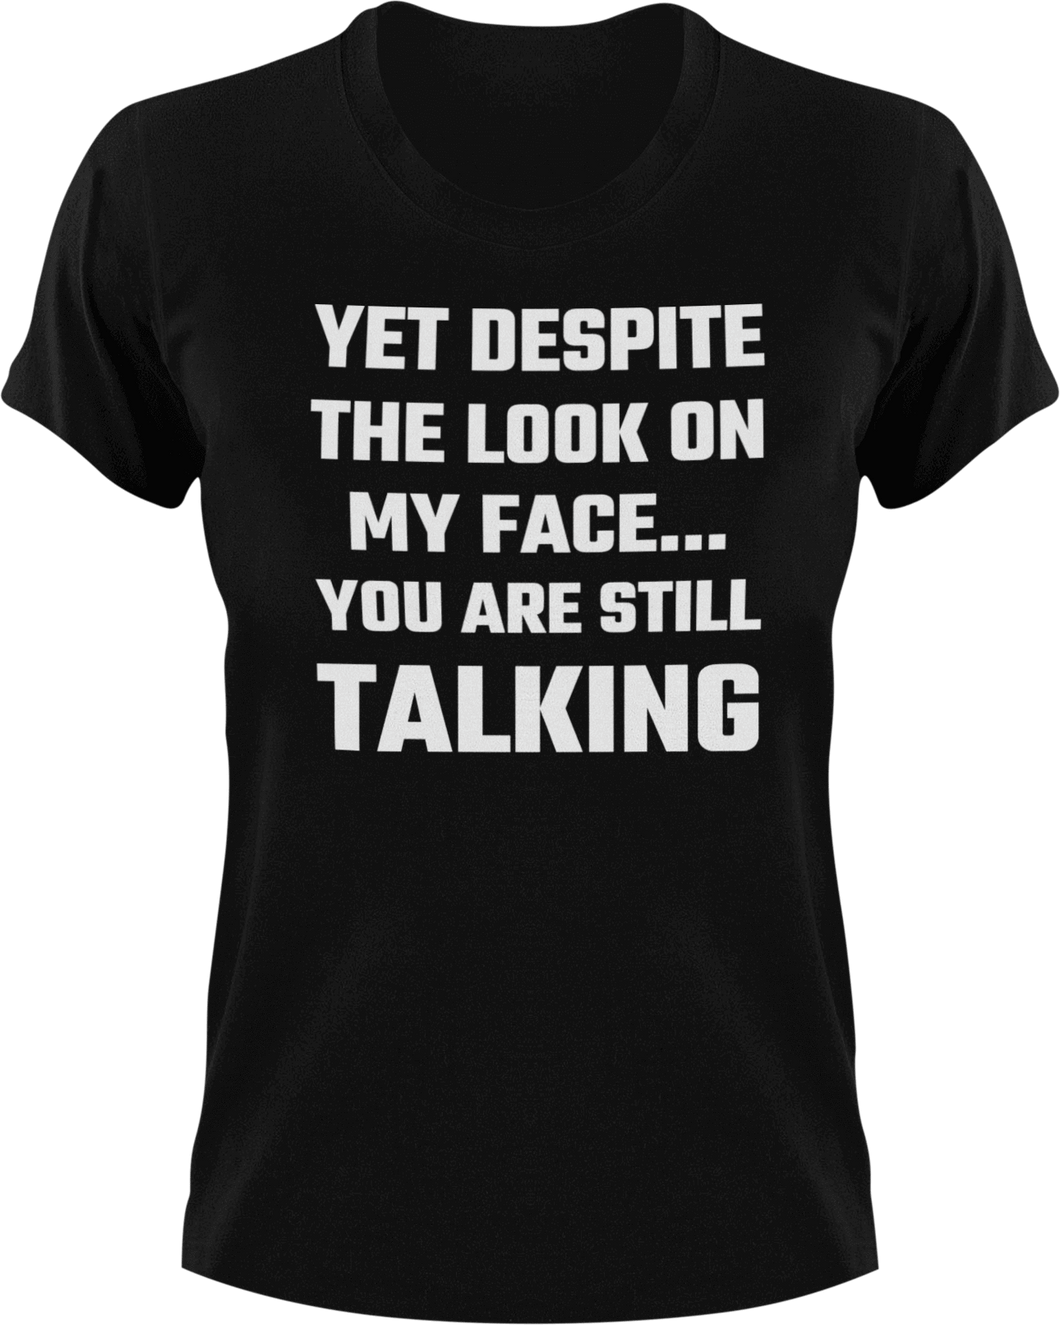 Yet despite the look on my face you are still talking T-Shirtdad, Dad Jokes, Fathers day, Mens, mom, sarcastic, Unisex